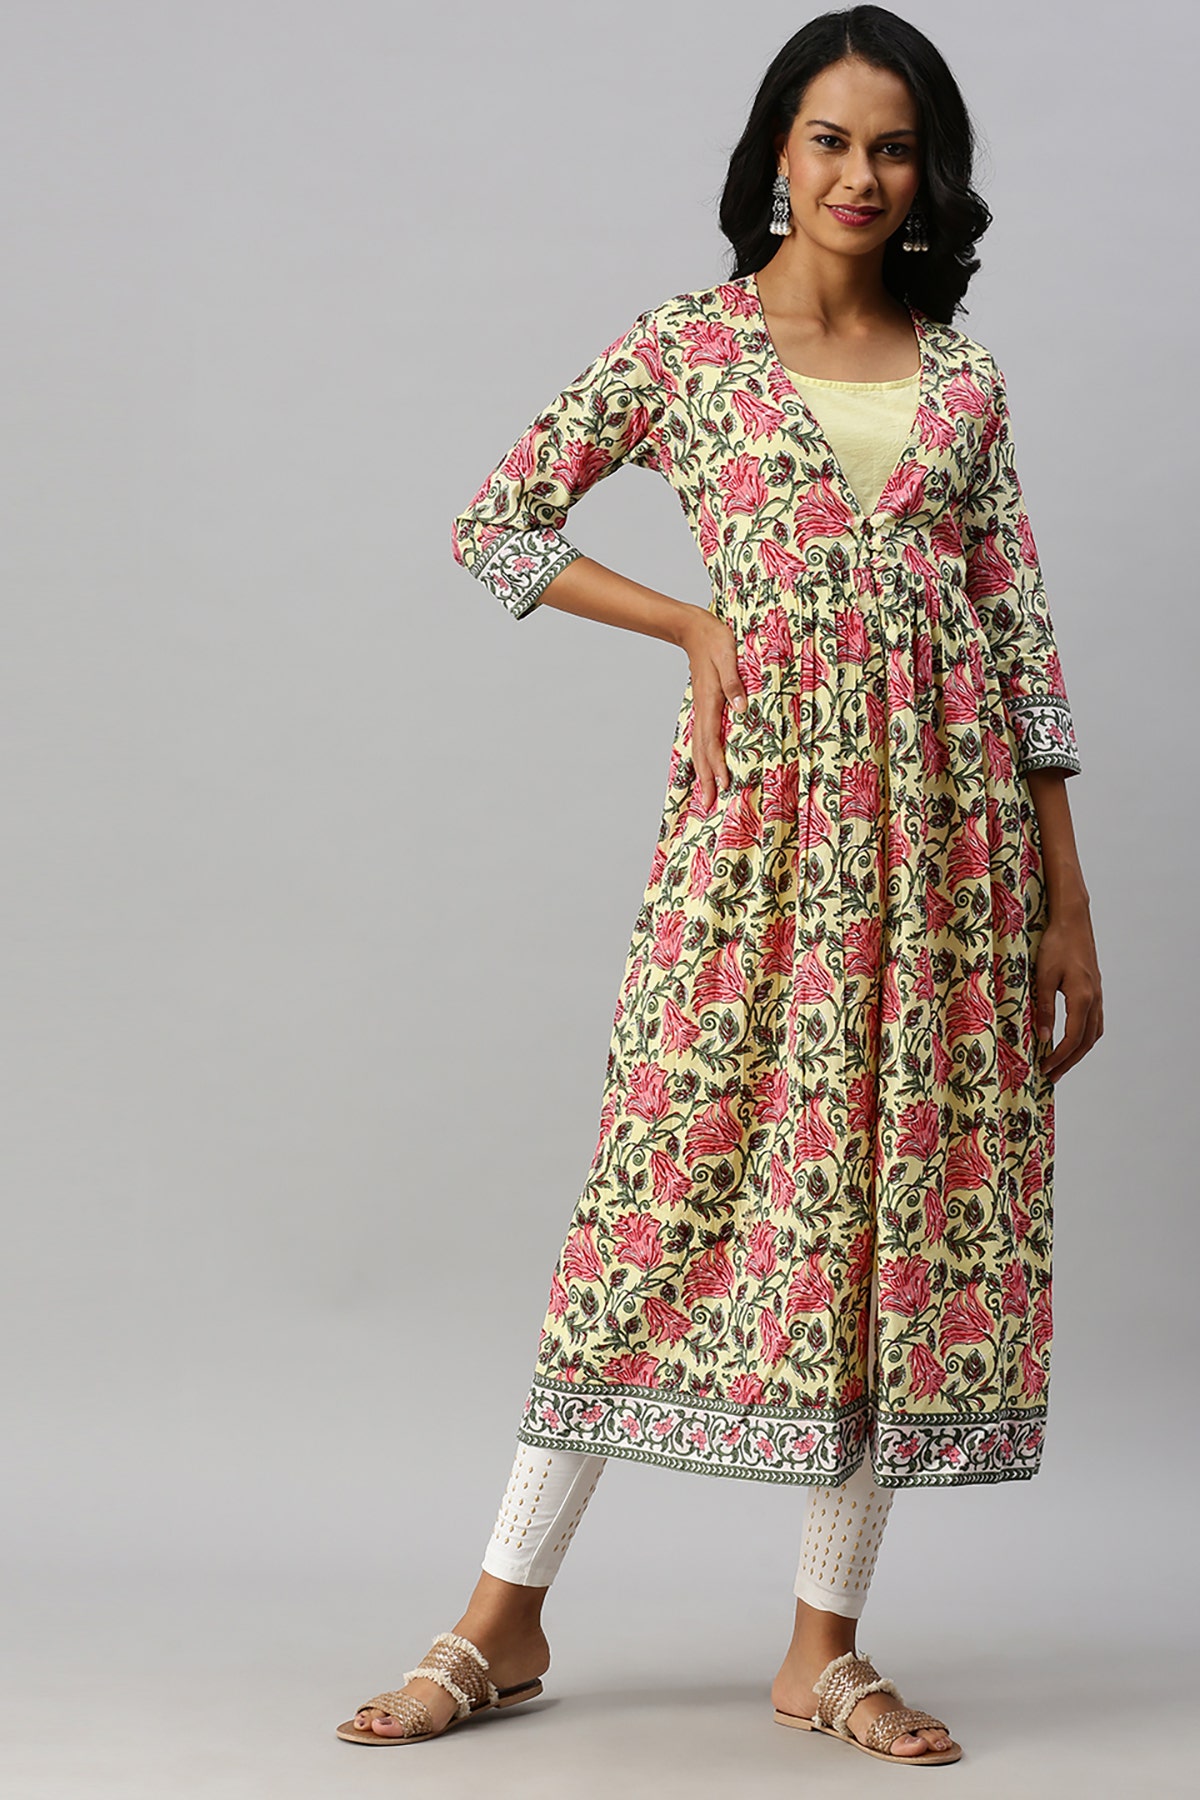 Amazon Sale 2023 Offers Ladies Kurtis At Up To 80 Off On Your Fav Kurti  Design